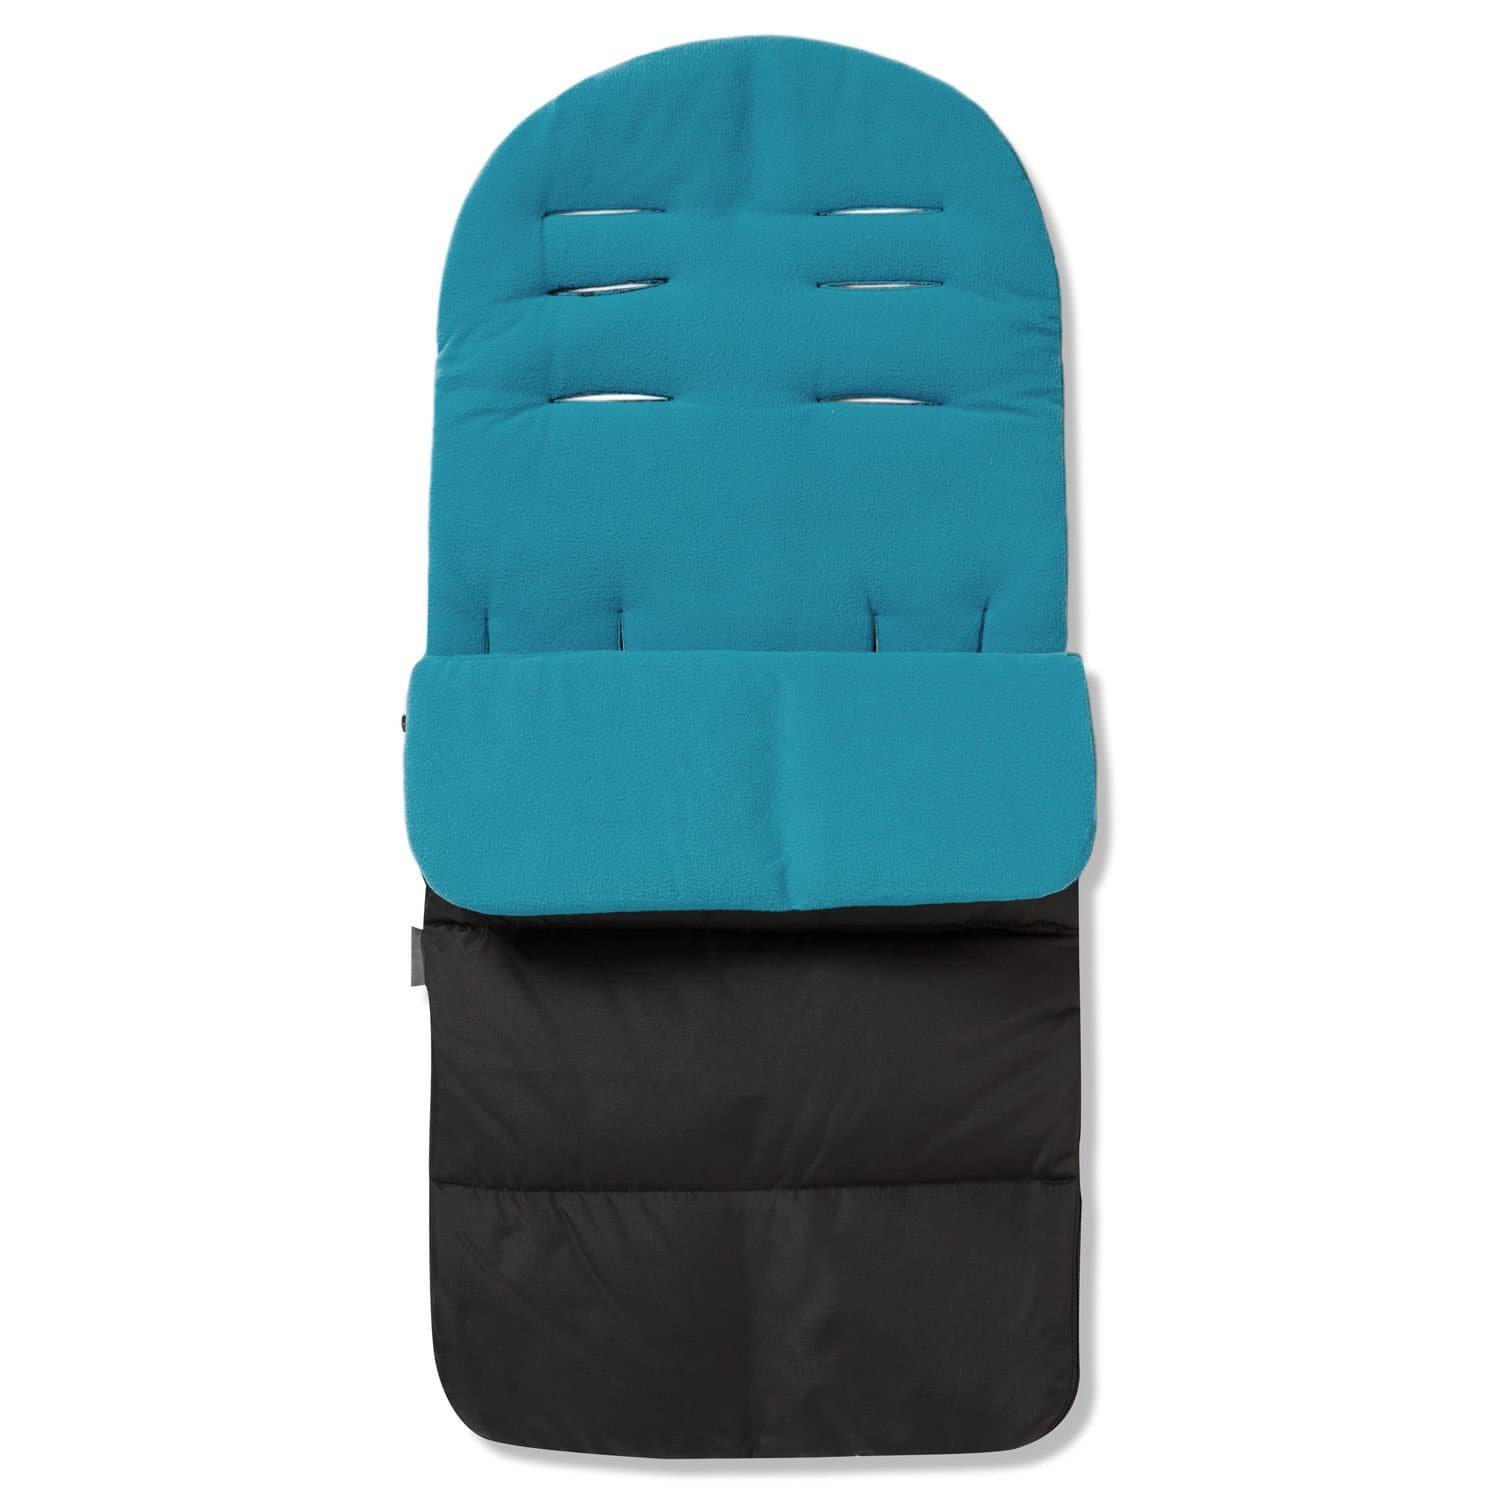 Premium Footmuff / Cosy Toes Compatible with Bebe 9 - Ocean Blue / Fits All Models | For Your Little One